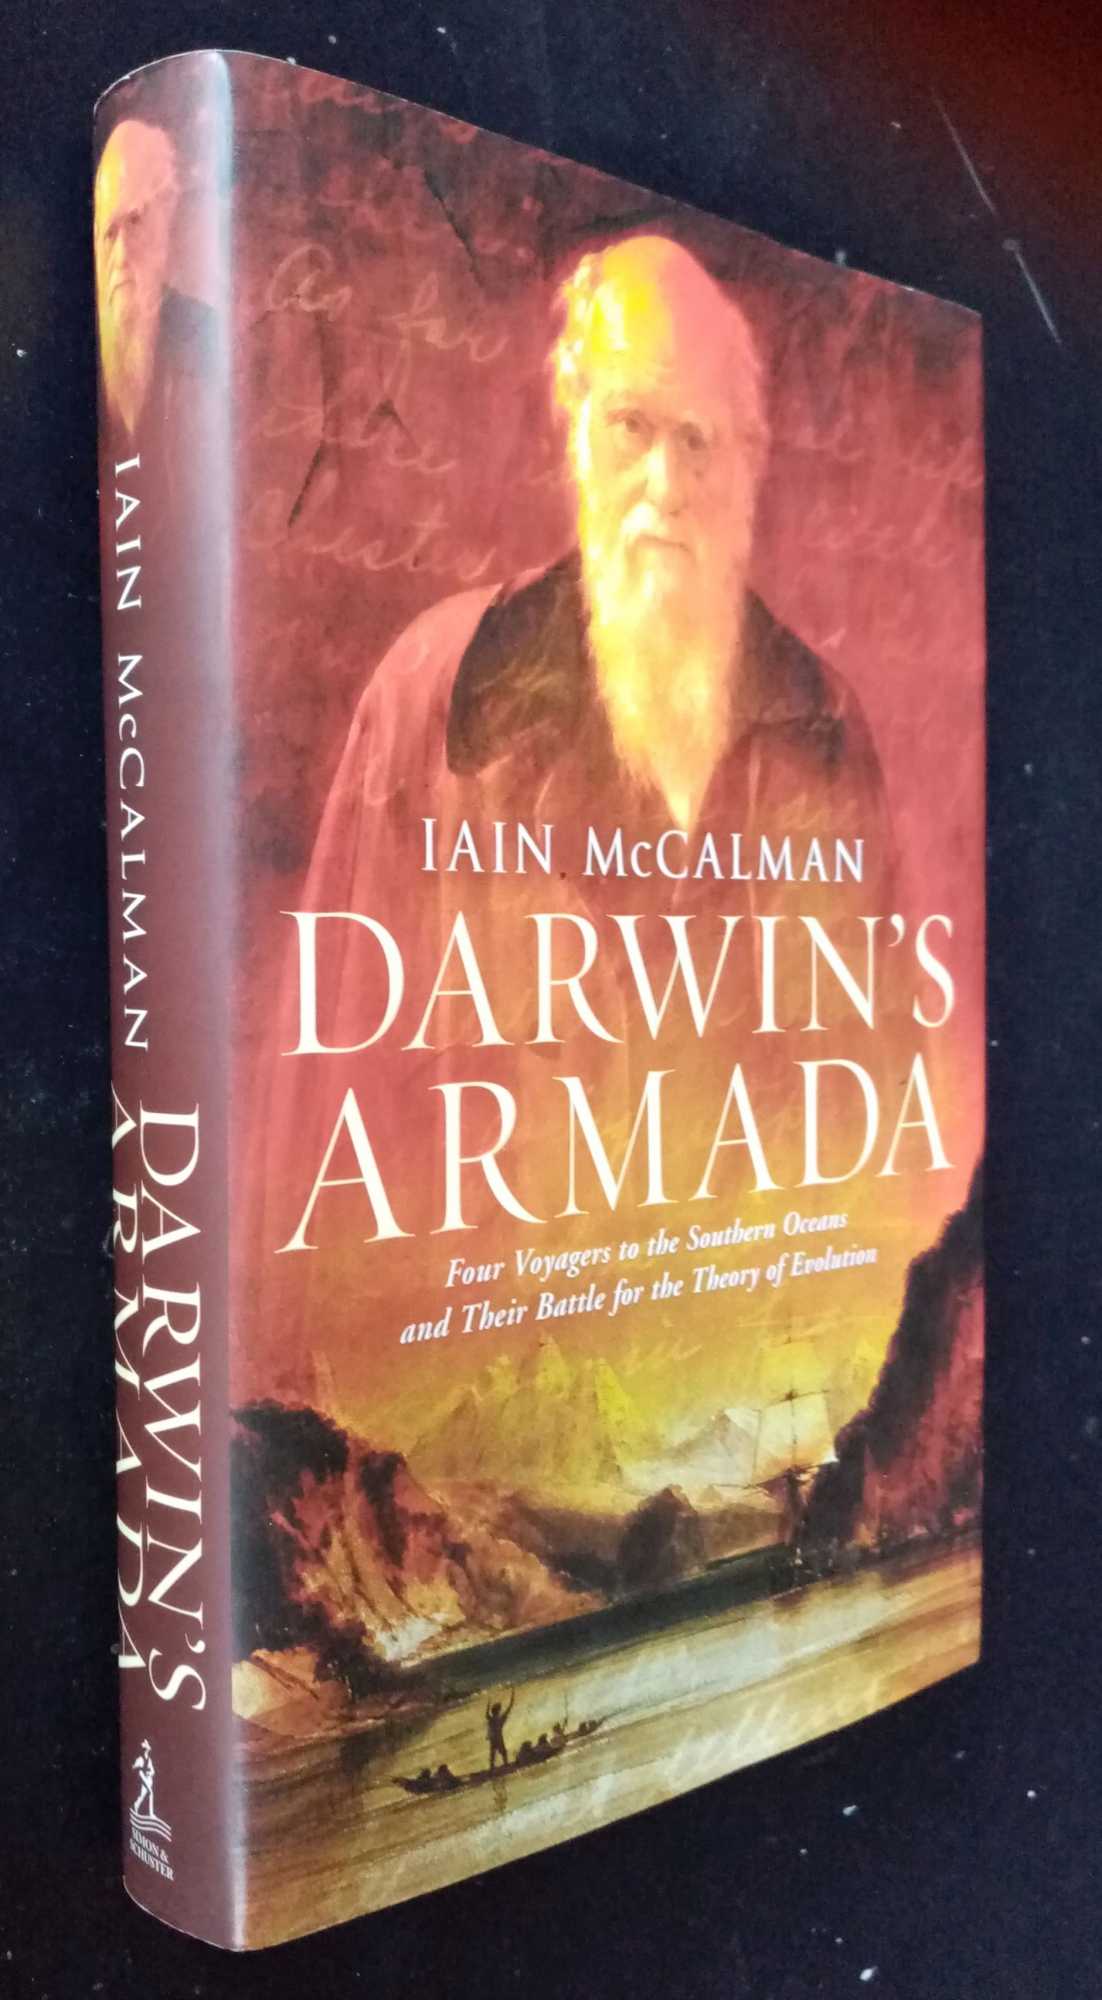 Iain McCalman - Darwin's Armada: Four Voyagers to the Southern Oceans and Their Battle for the Theory of Evolution